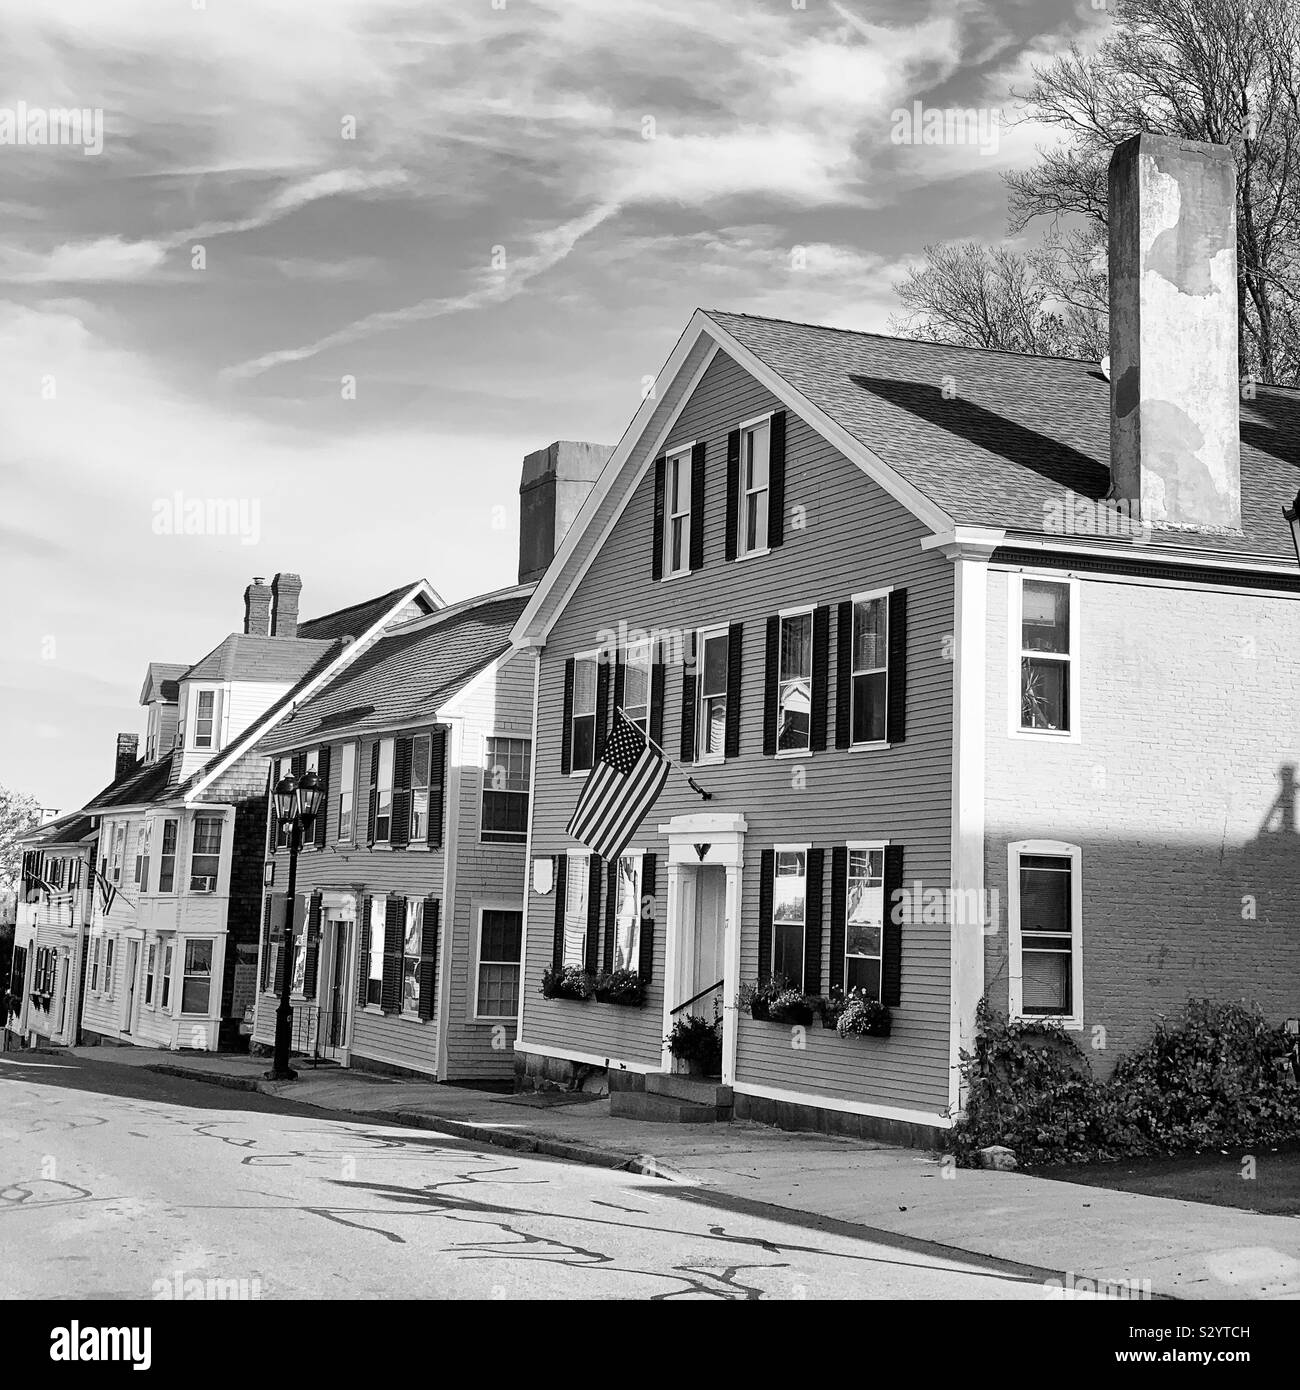 Black and white image of houses on Leyden Street, Plymouth Historic District, Plymouth, Massachusetts, United States Stock Photo